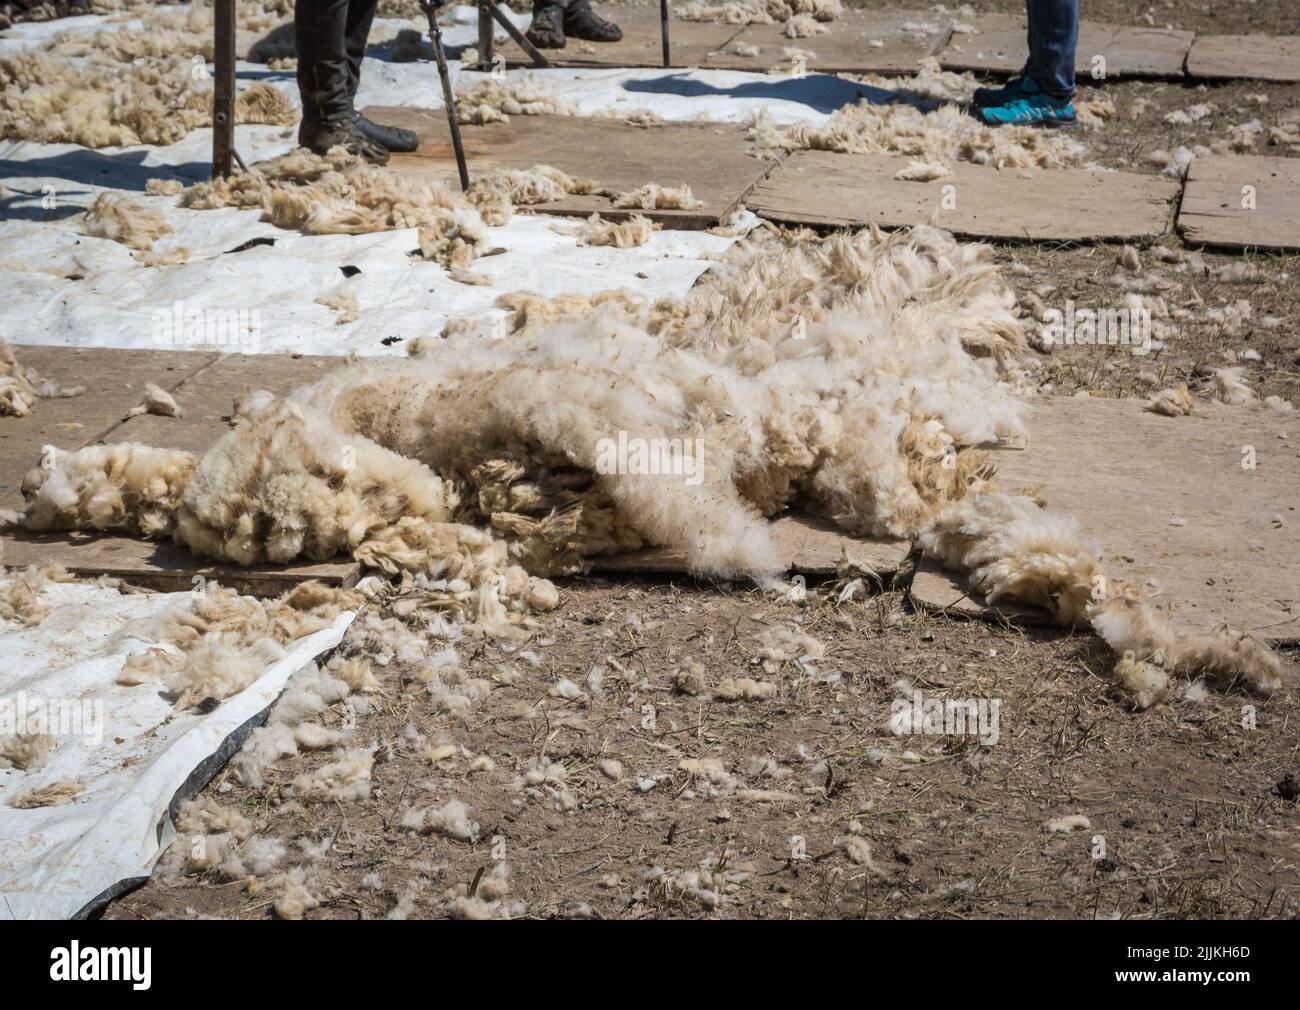 Men use clippers to shear sheep fleeces at a sheep shearing. sheep shearing in spring Stock Photo